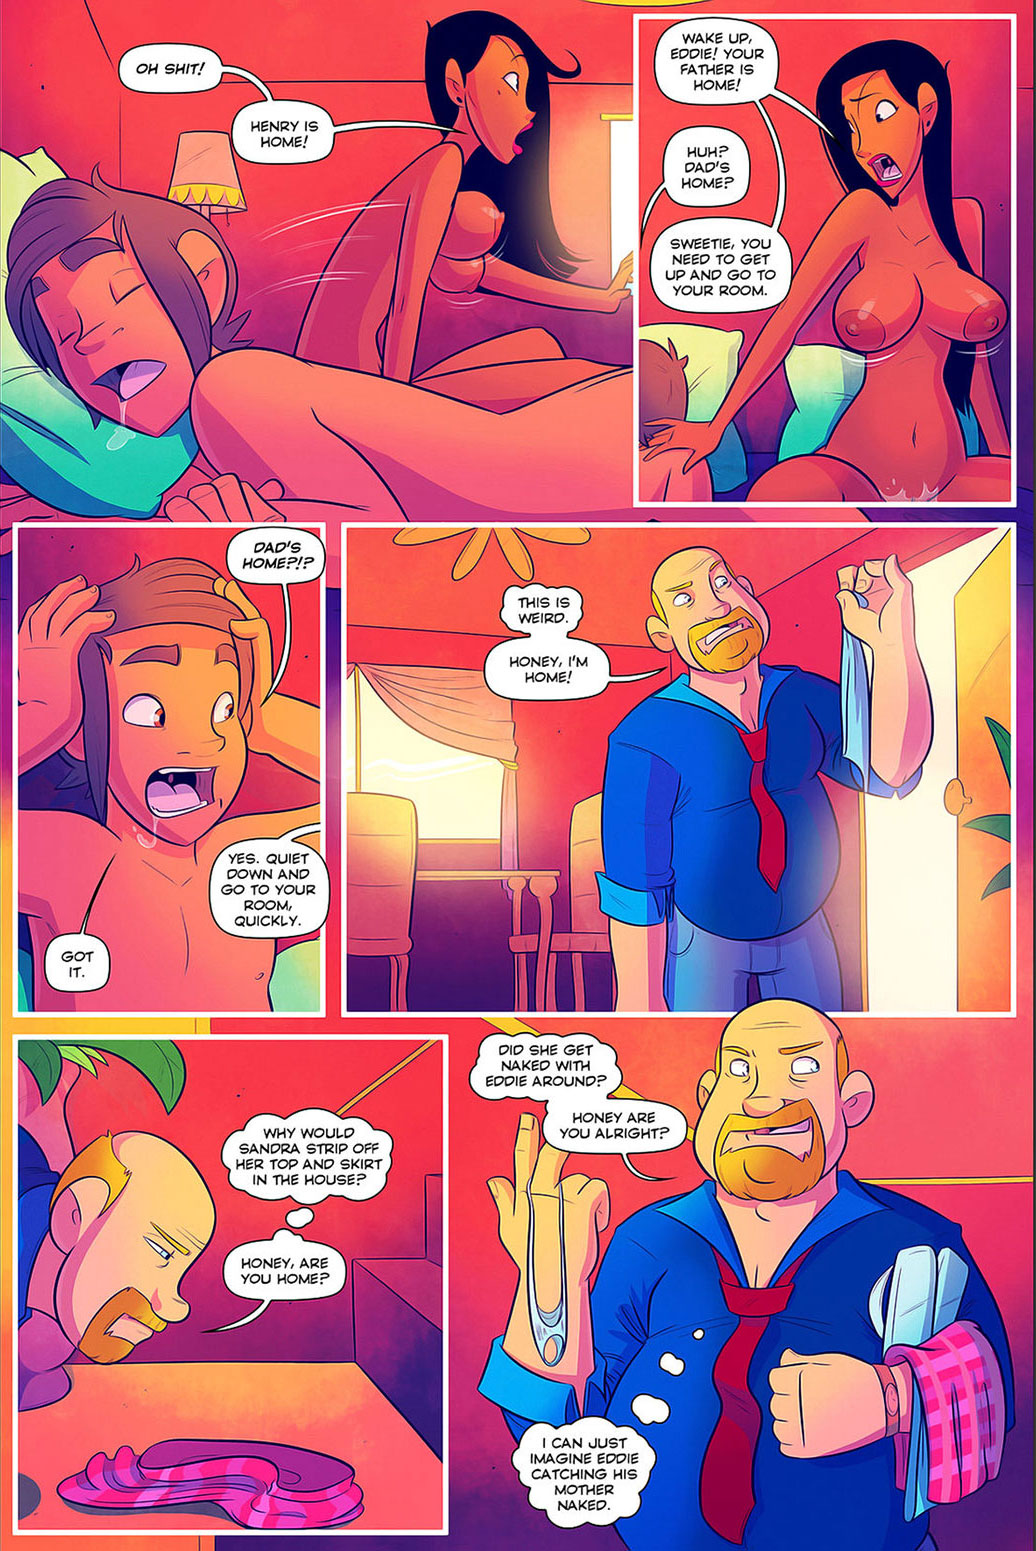 Jab comics - Keeping it up with the Joneses 2 - page 12